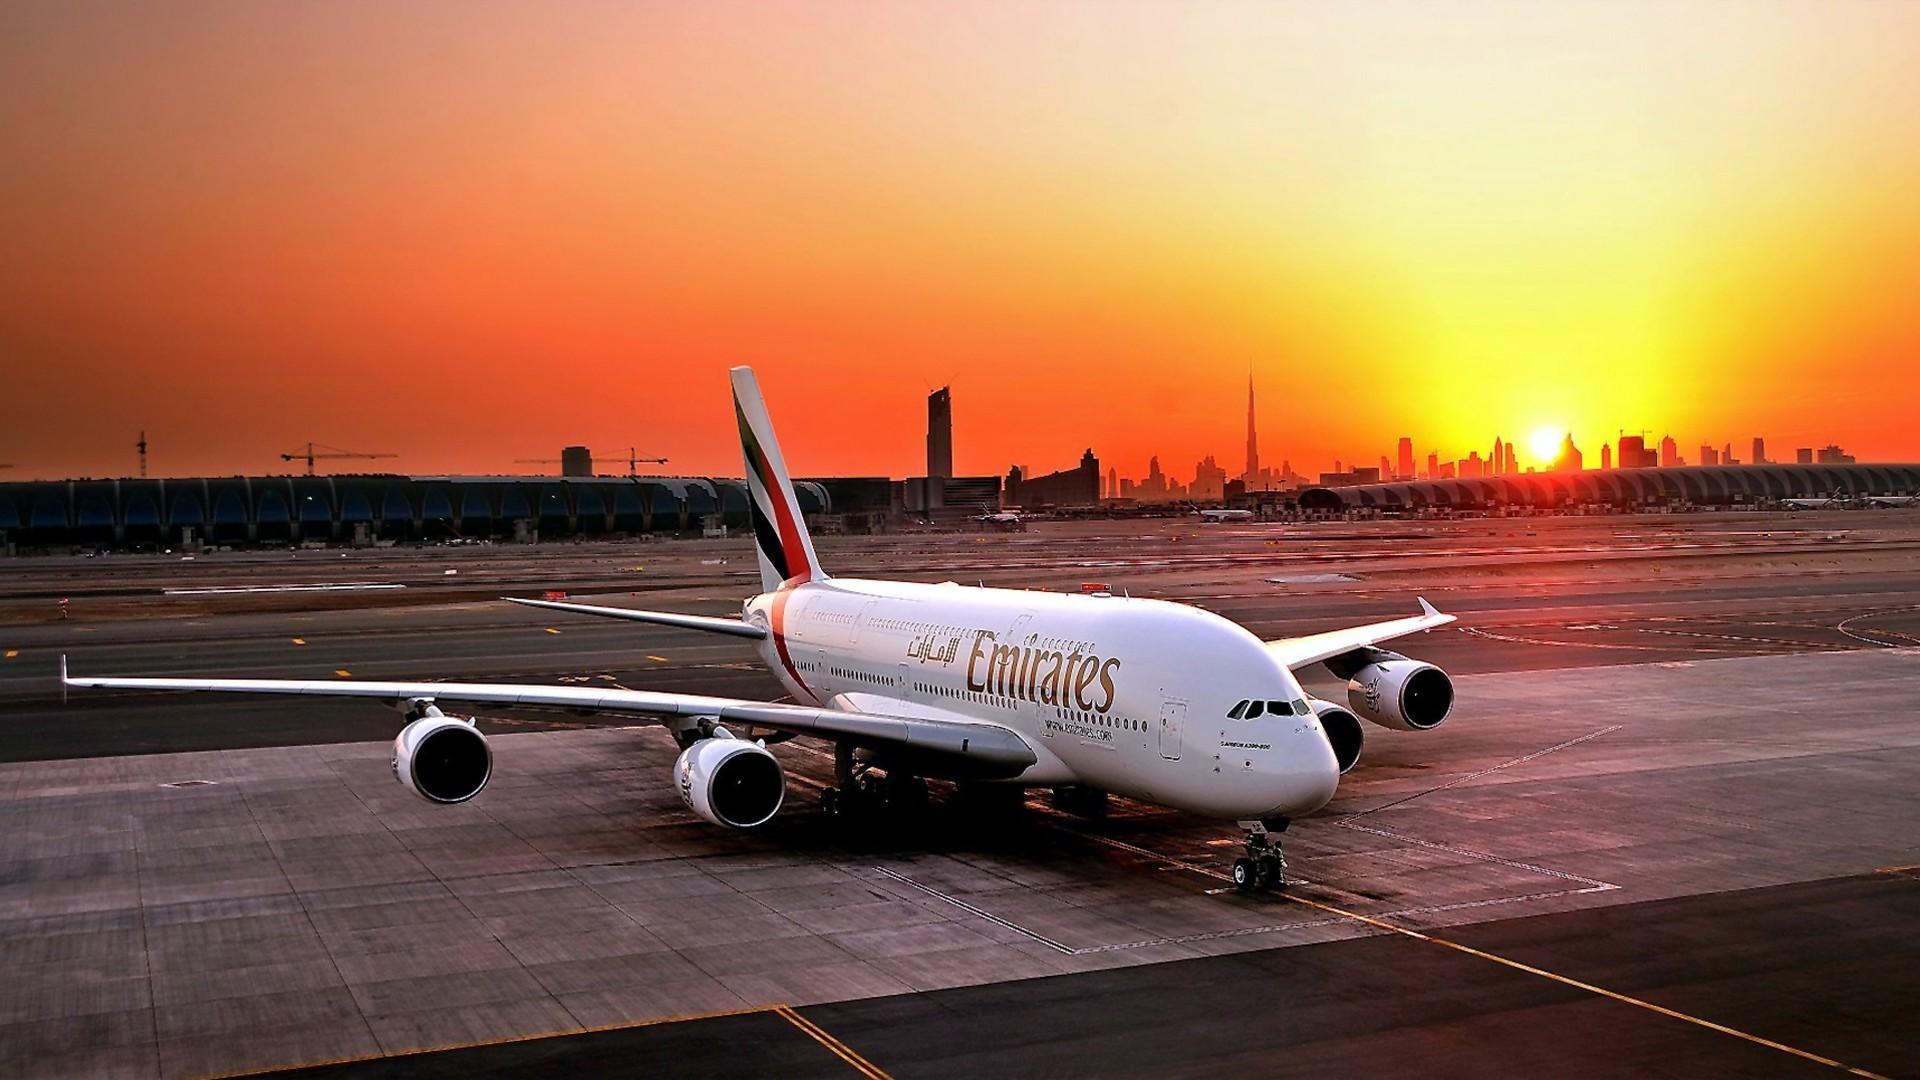 Sunset Aircraft Dubai Airbus A380 800 Aviation Emirates Airlines